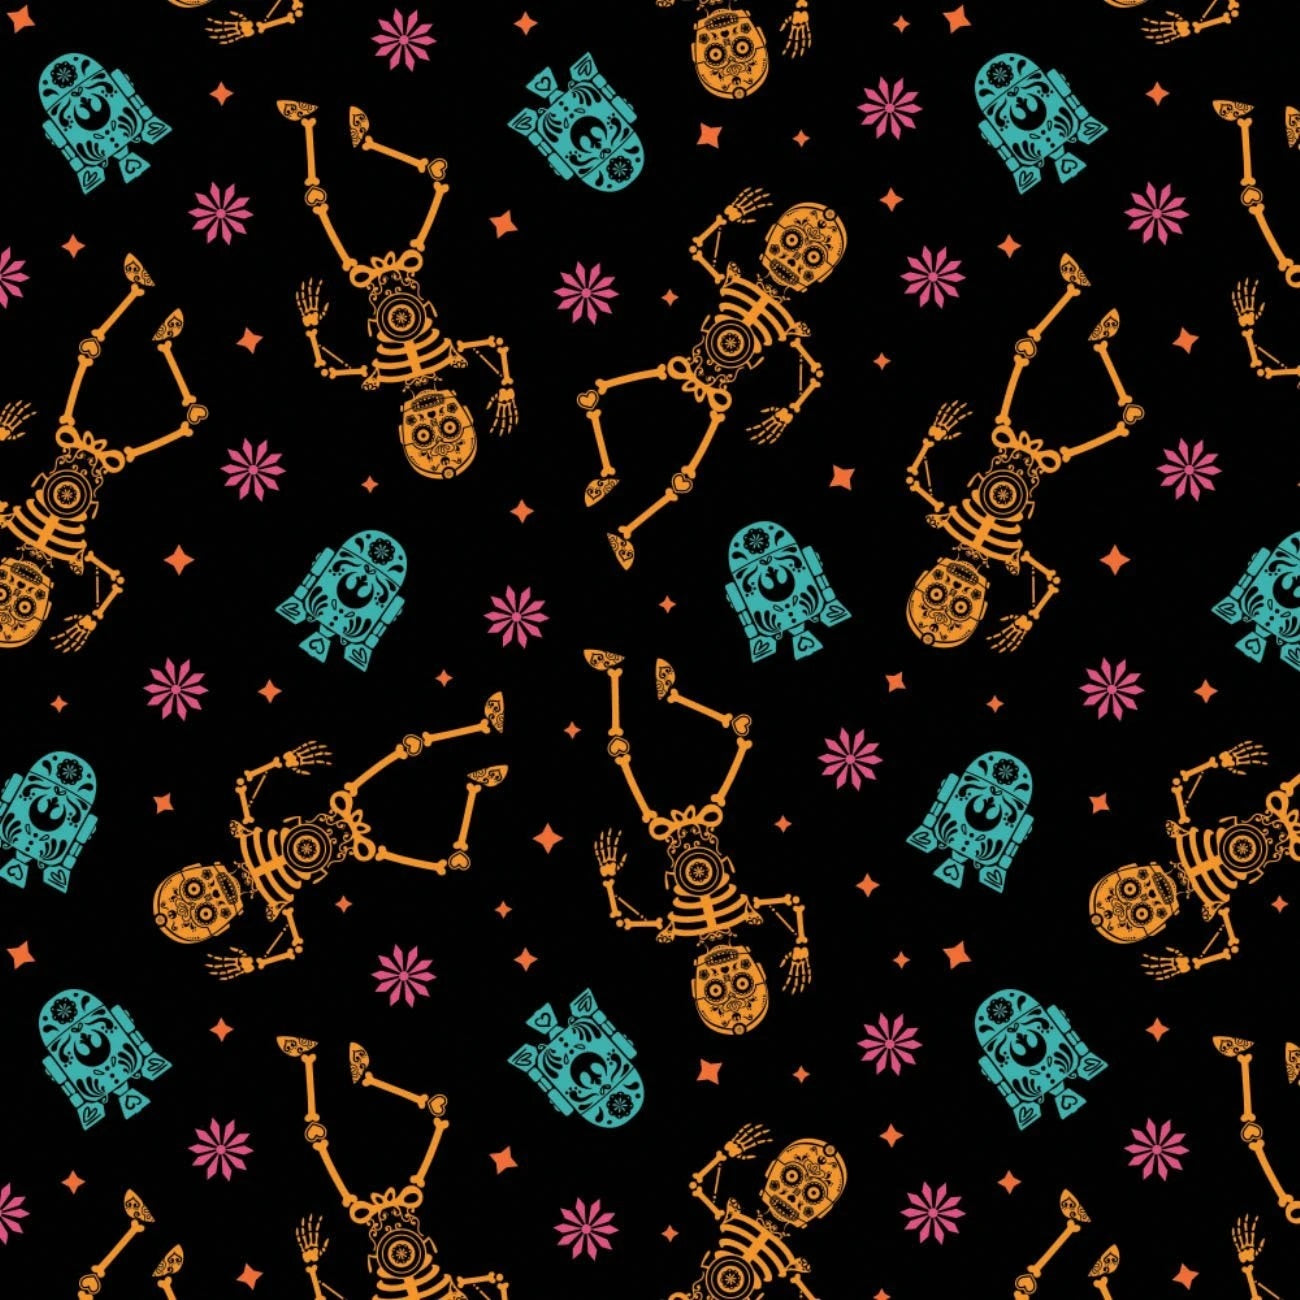 Character Halloween Cotton Print - Tossed Sugar Droids